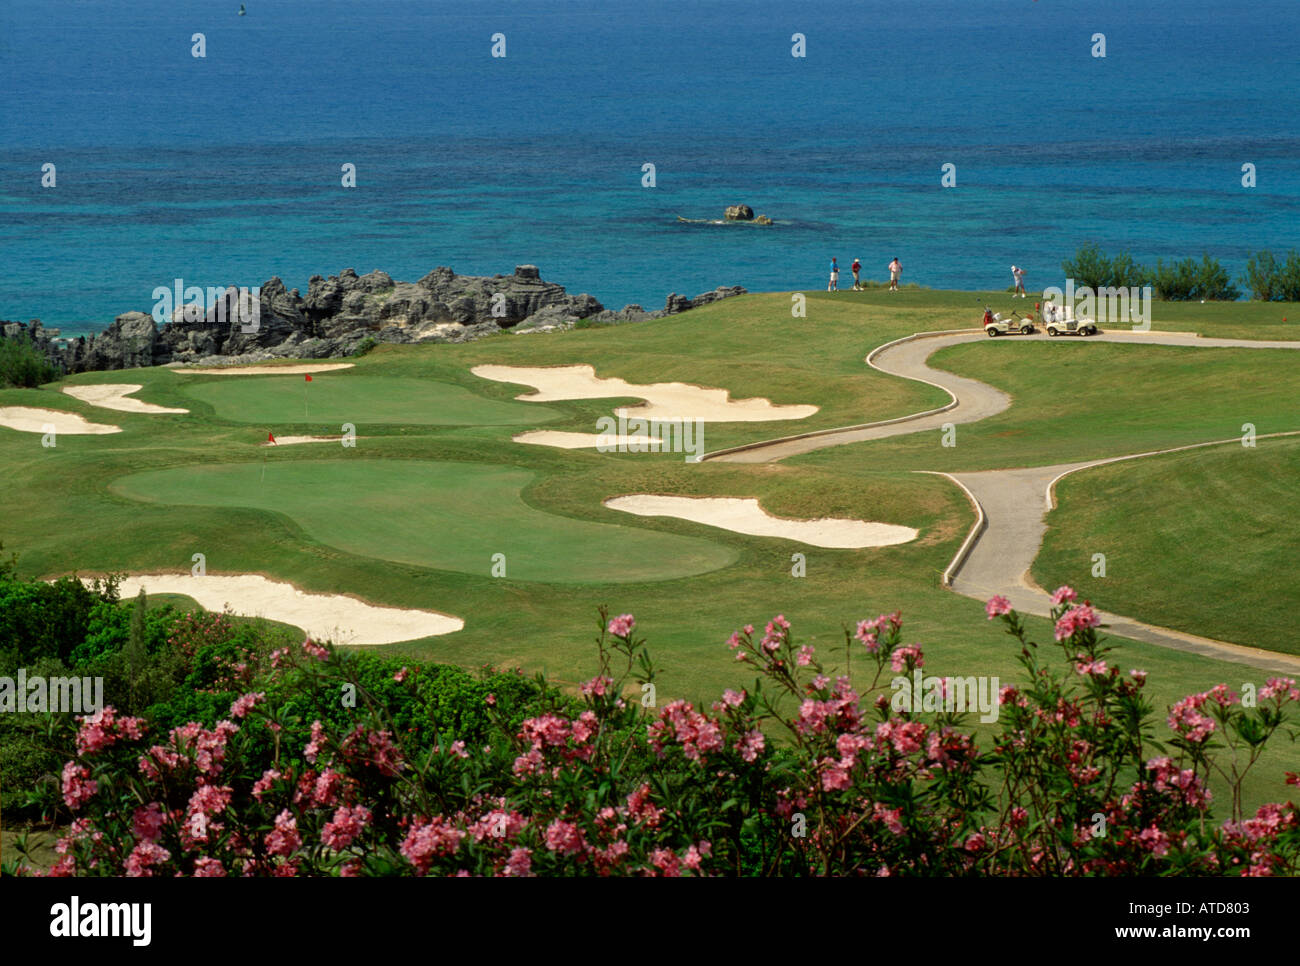 Overhead view of St. George's golf course on the island of Bermuda Stock Photo